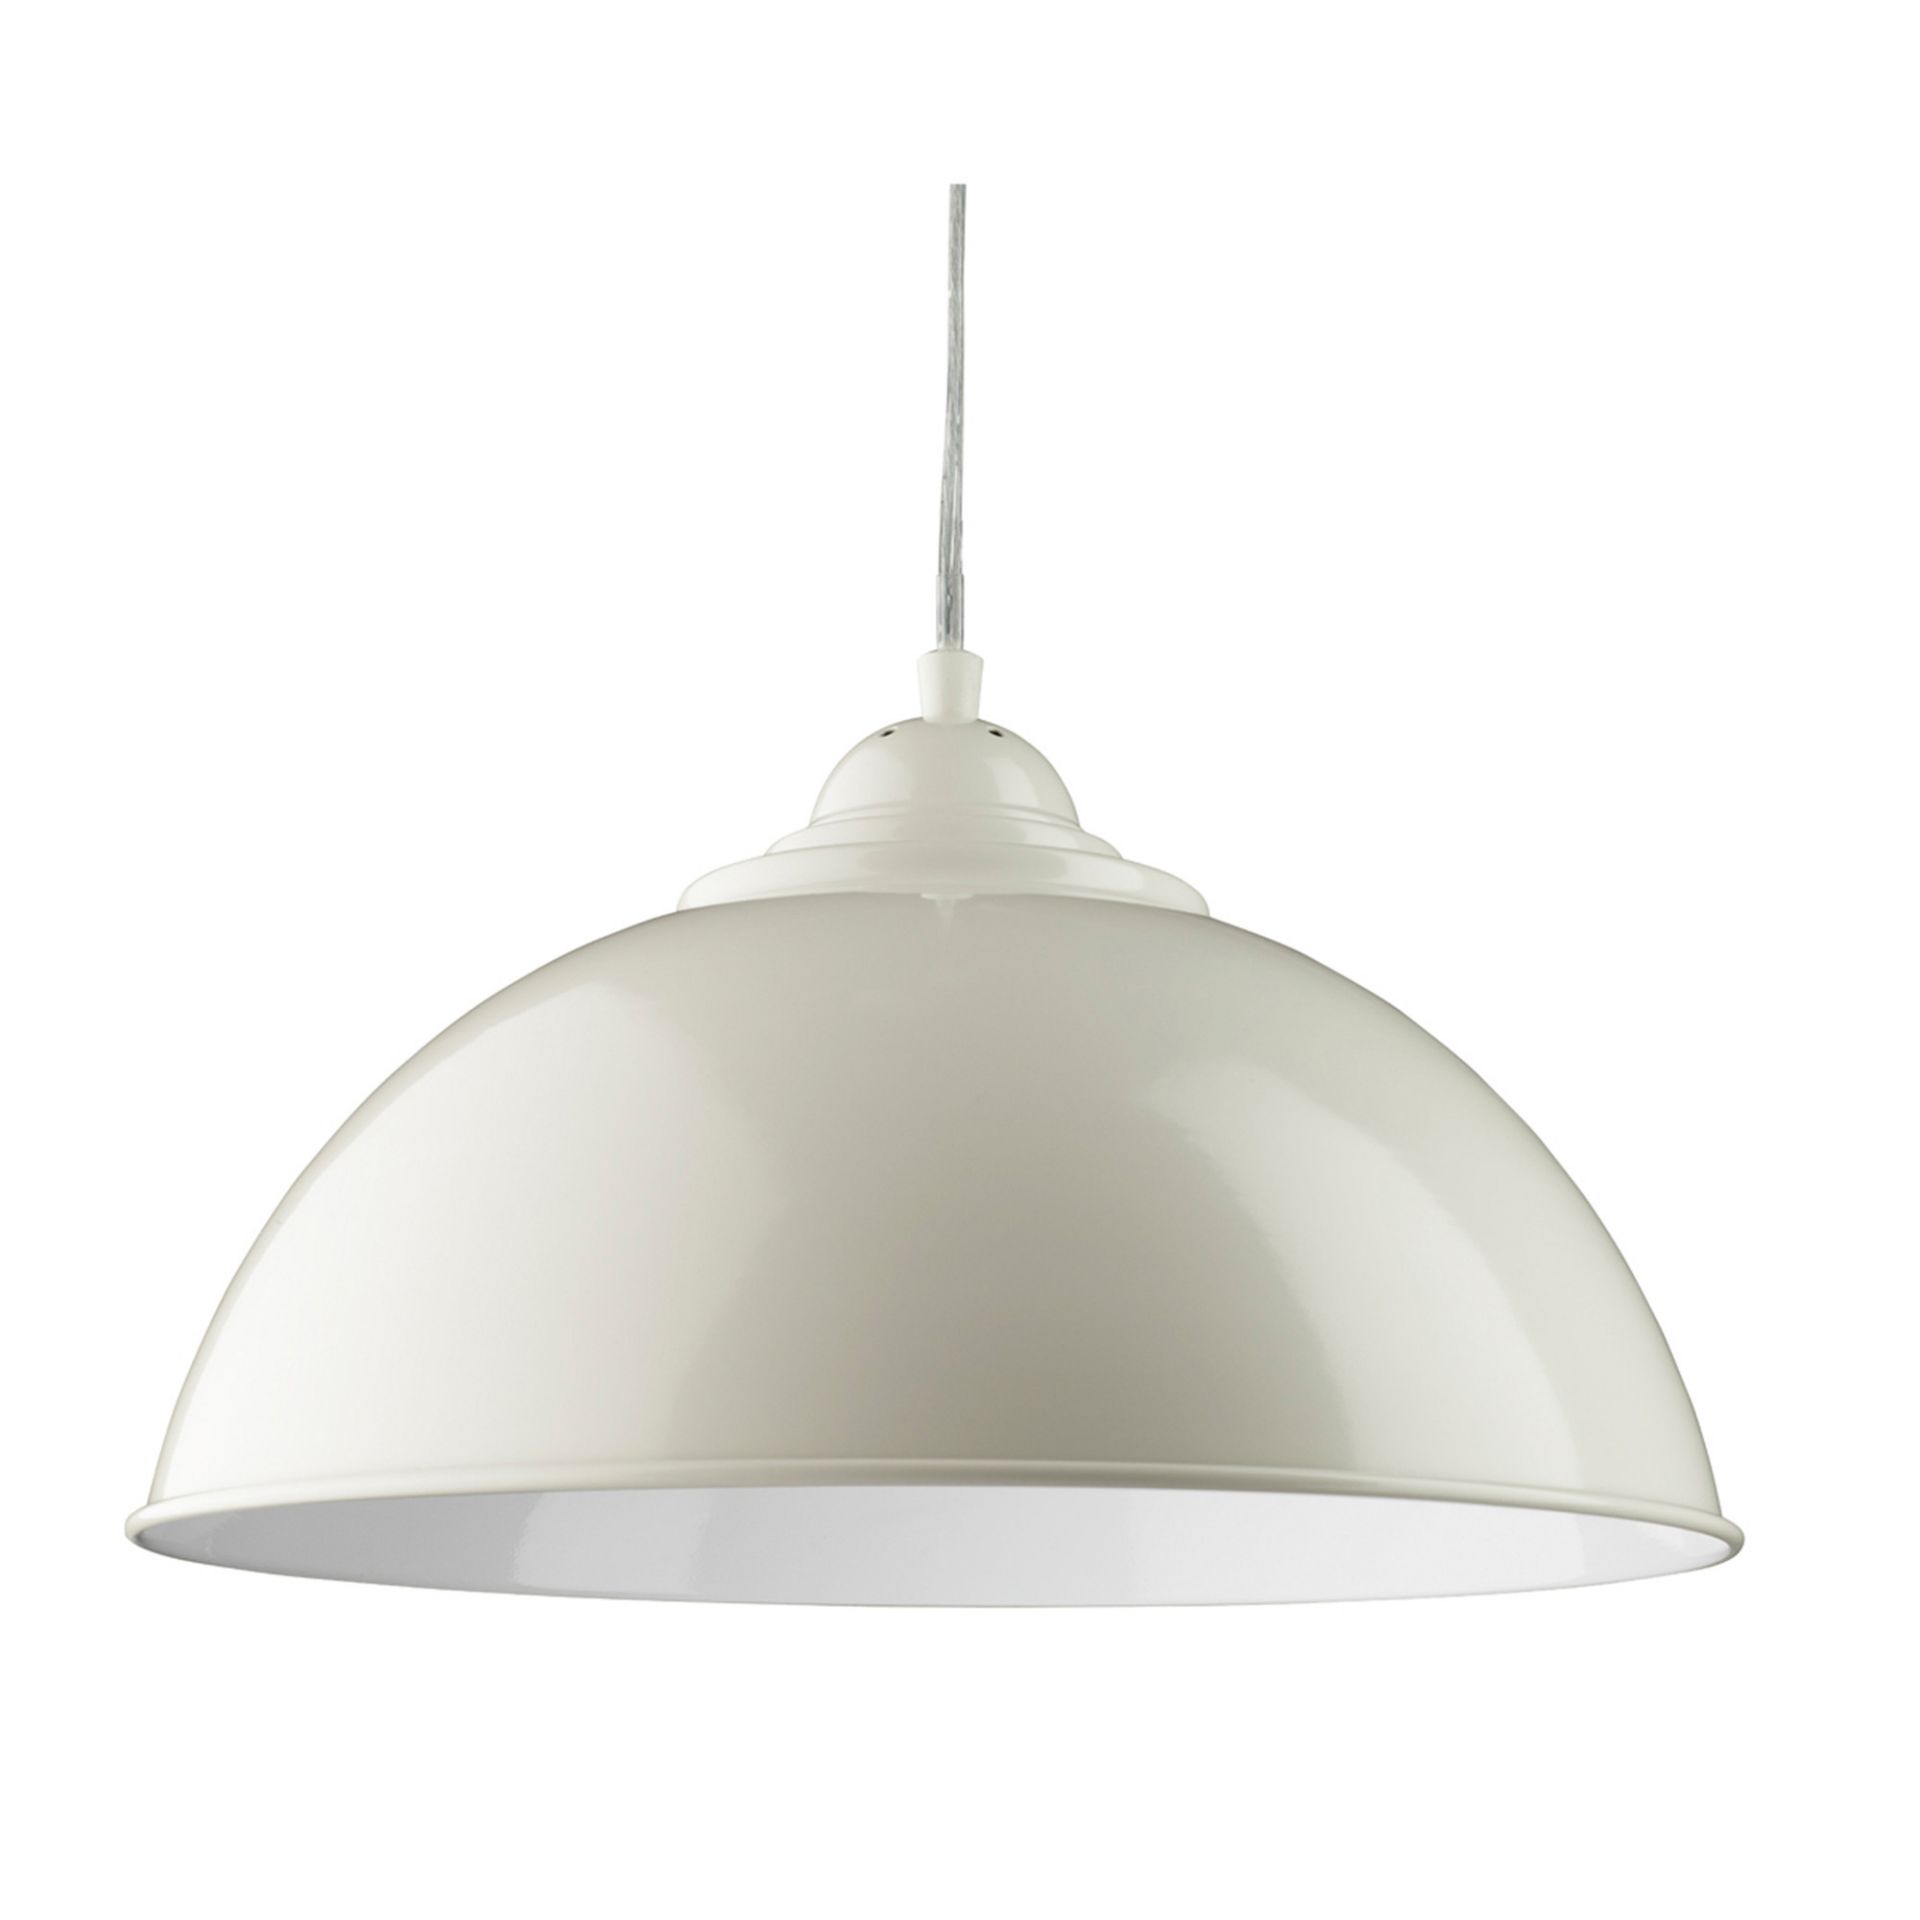 2 x Metal Dome Pendant Lights in Ivory With White Inner - New Boxed Stock - CL323 - Ref: 8140CR A1 - - Image 2 of 2